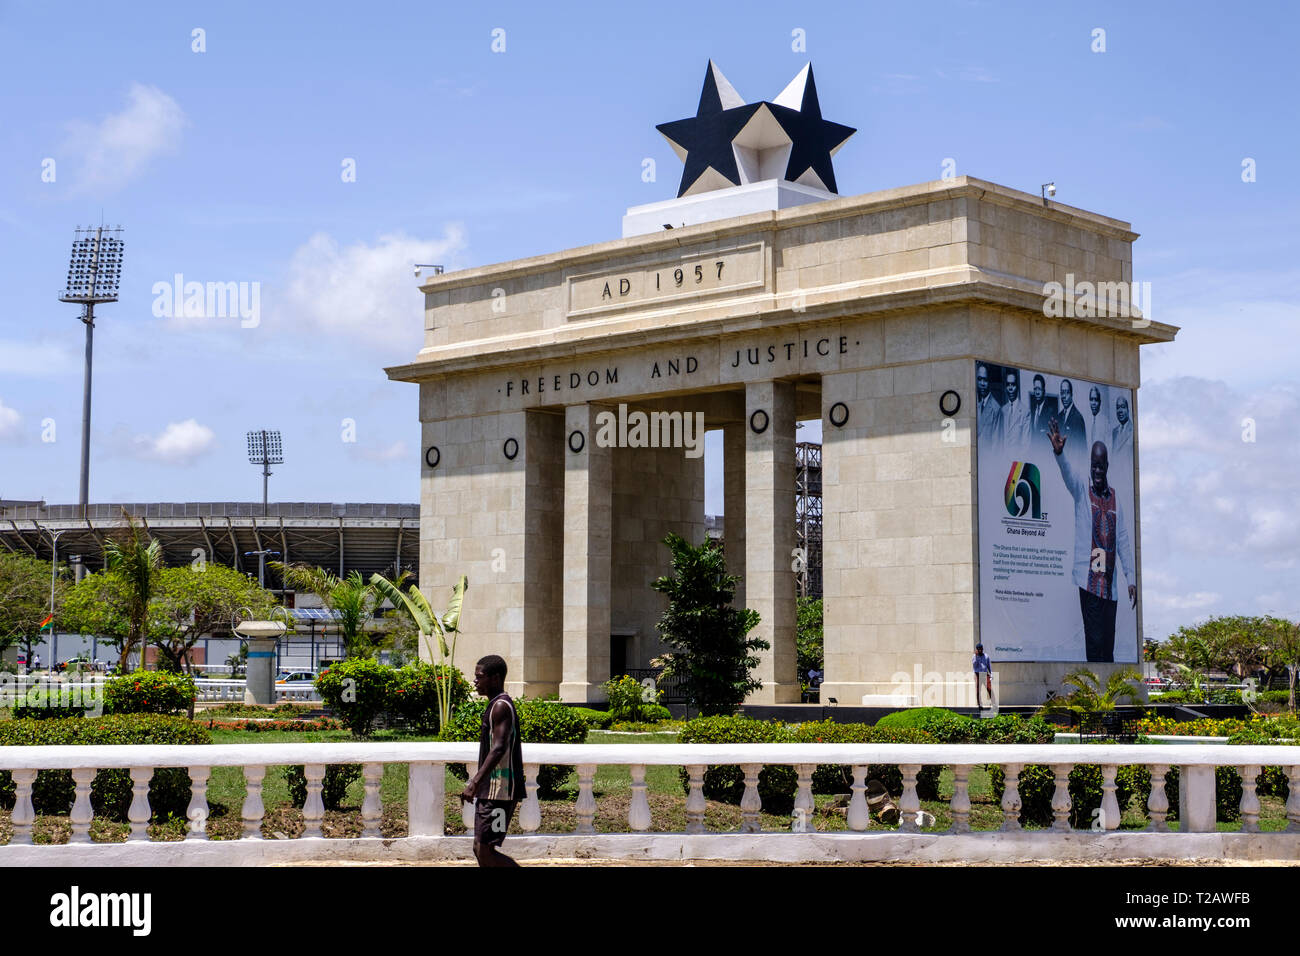 ACCRA,GHANA - APRIL 11 2018: Unidentified black man walks past arch of Black Star Gate Monument, symbol of freedom and part of Independence Square Stock Photo